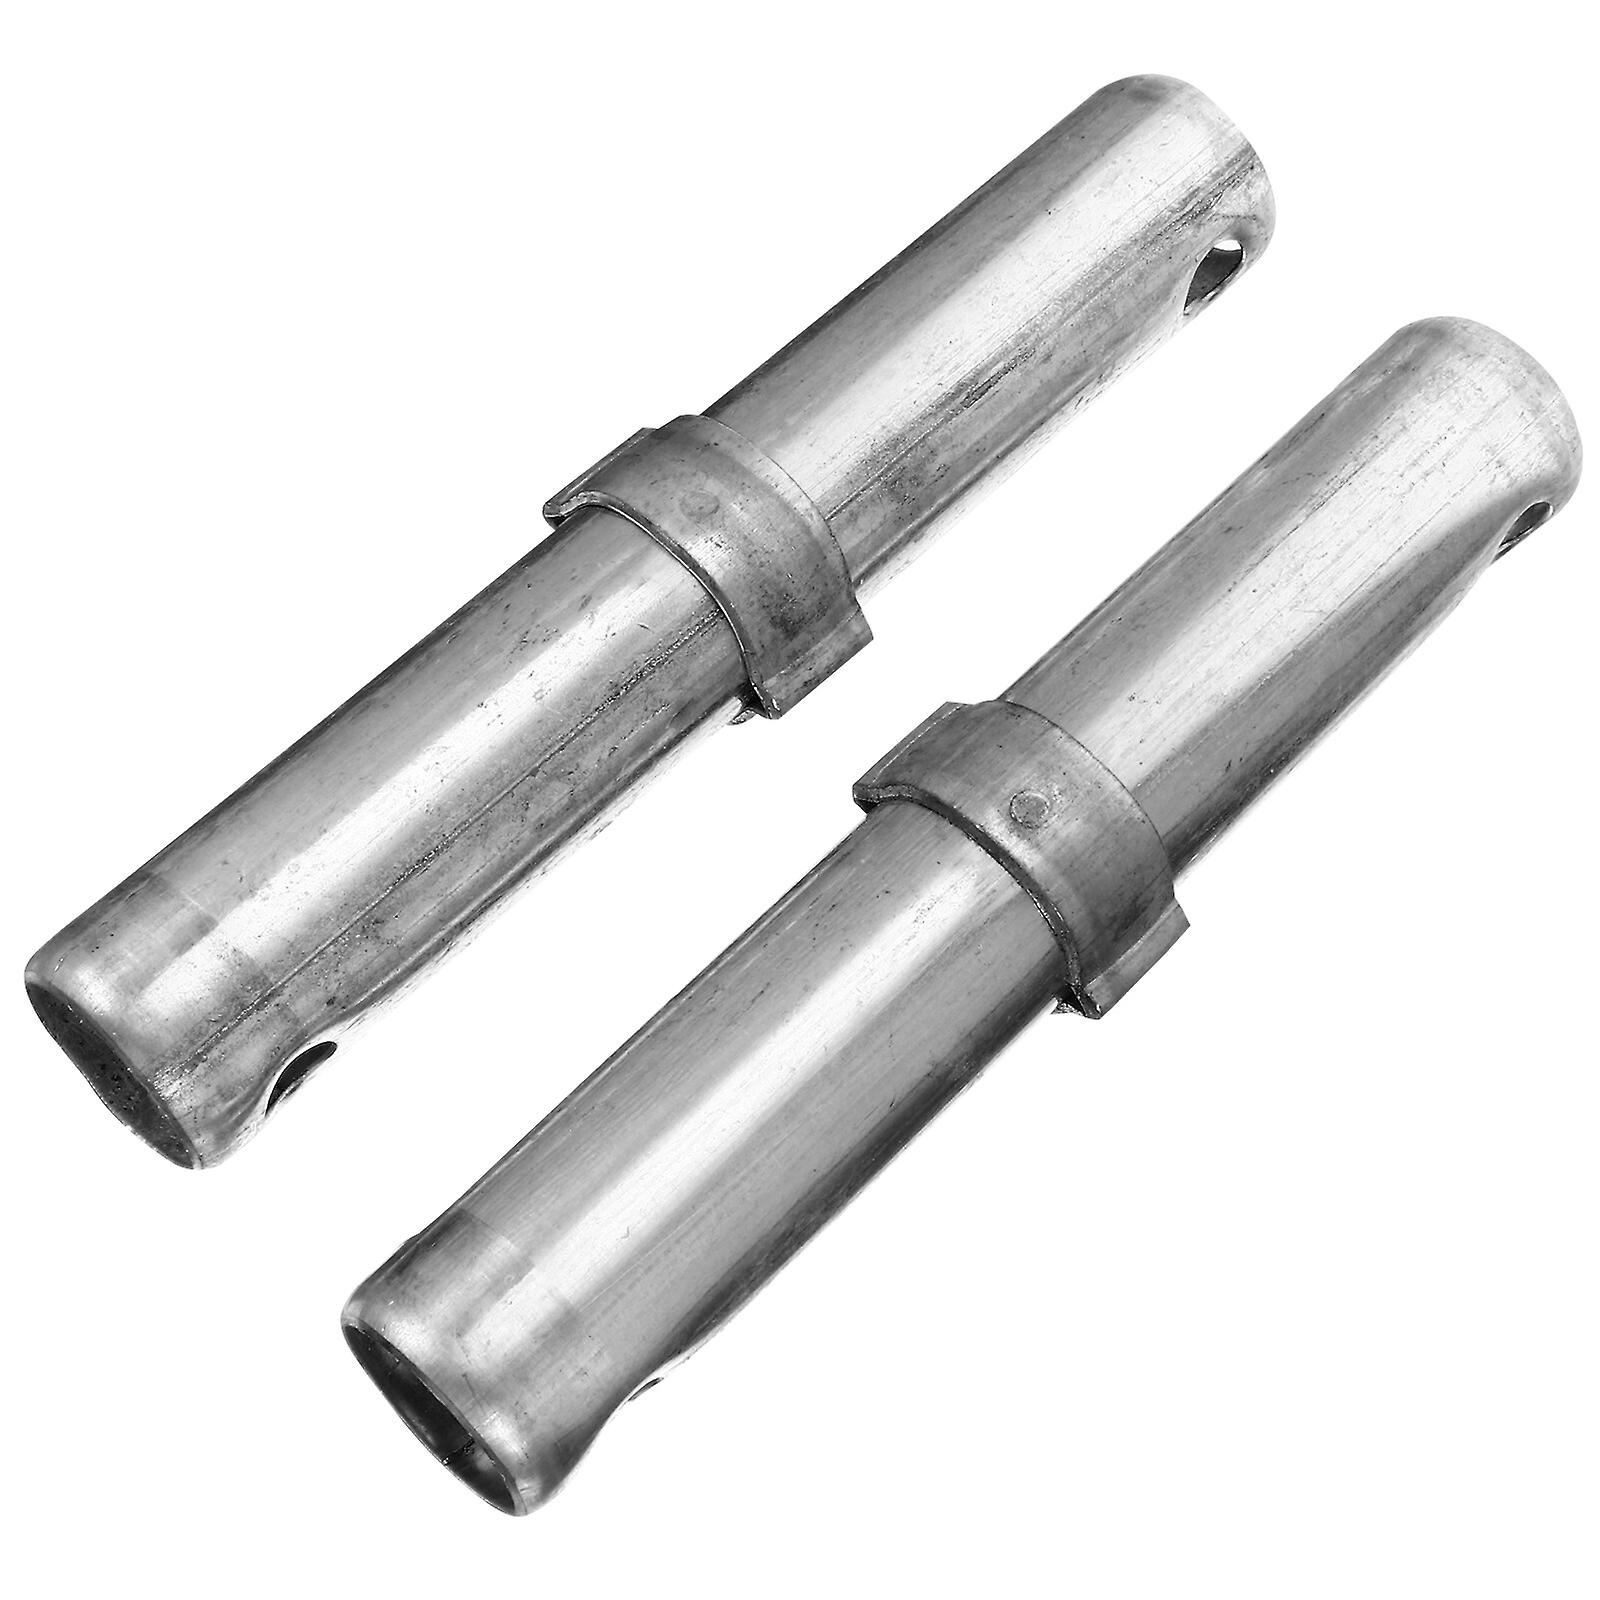 2pcs Scaffolding Coupling Pin Professional Scaffolding Accessories Supplies Part